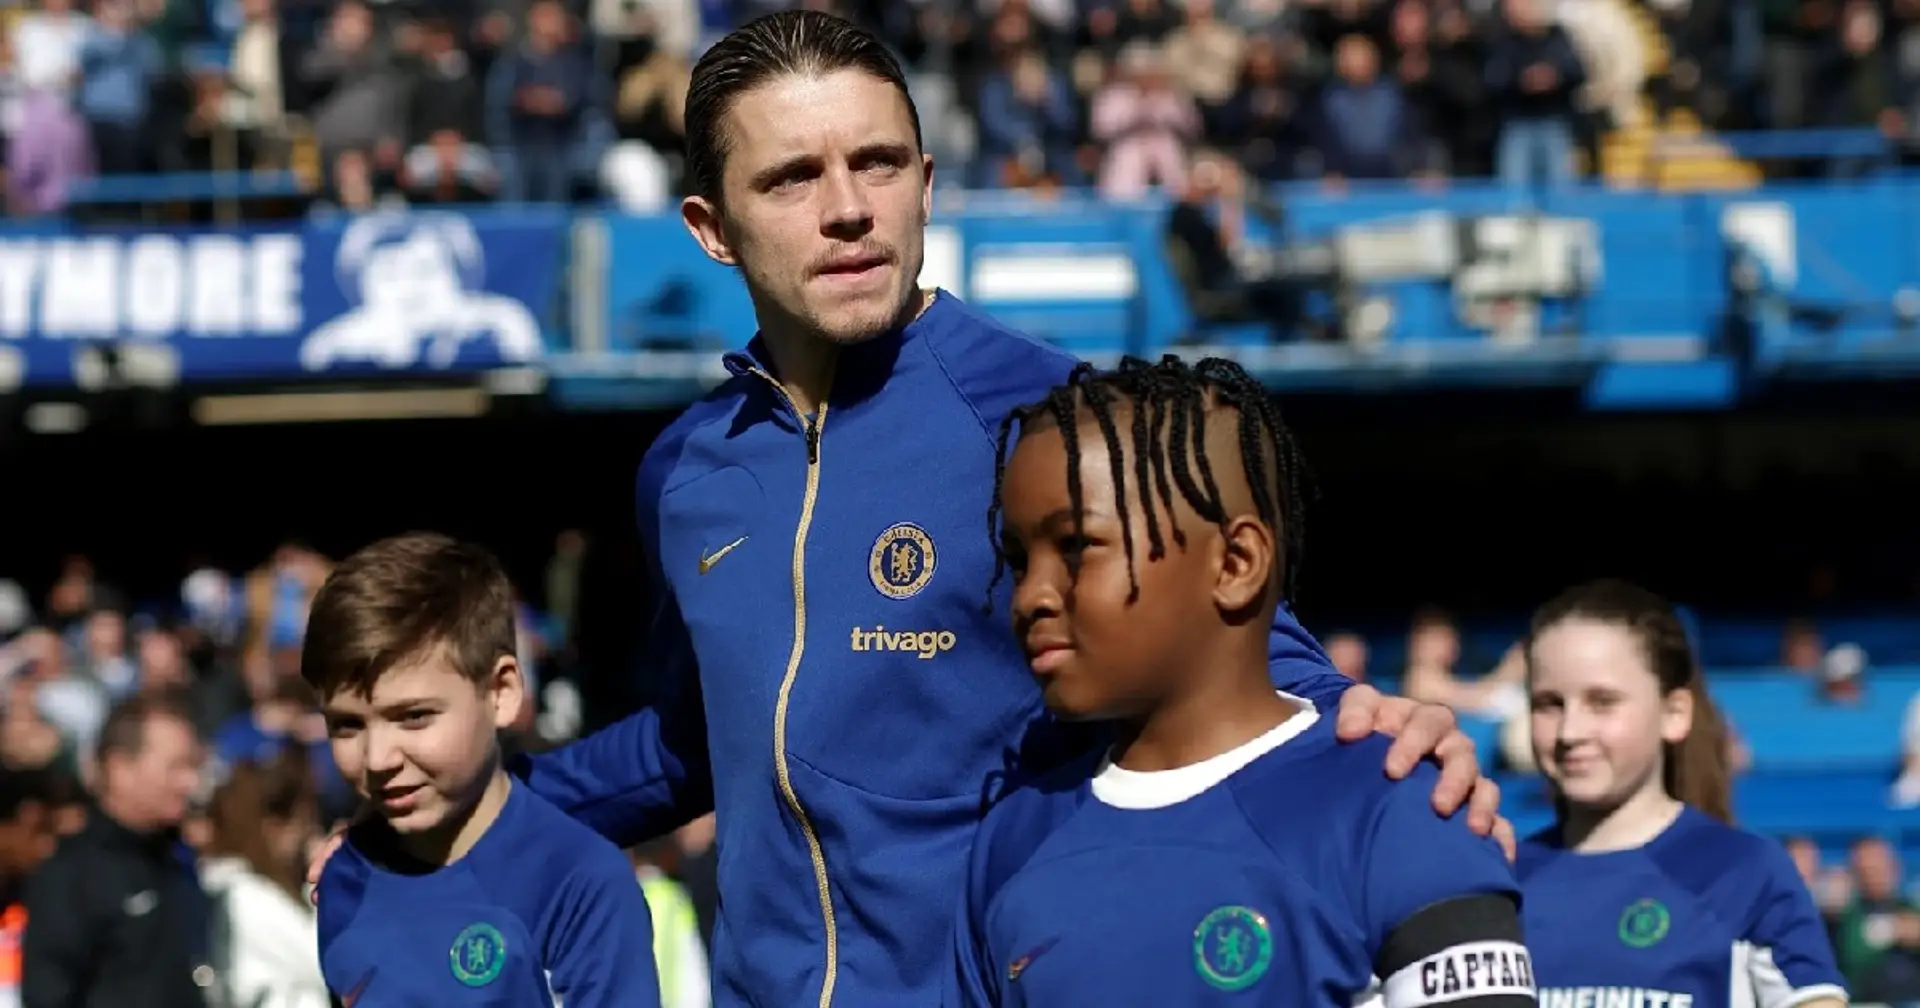 Chelsea release statement about 'abusive and defamatory' comments against Gallagher over viral social media clip